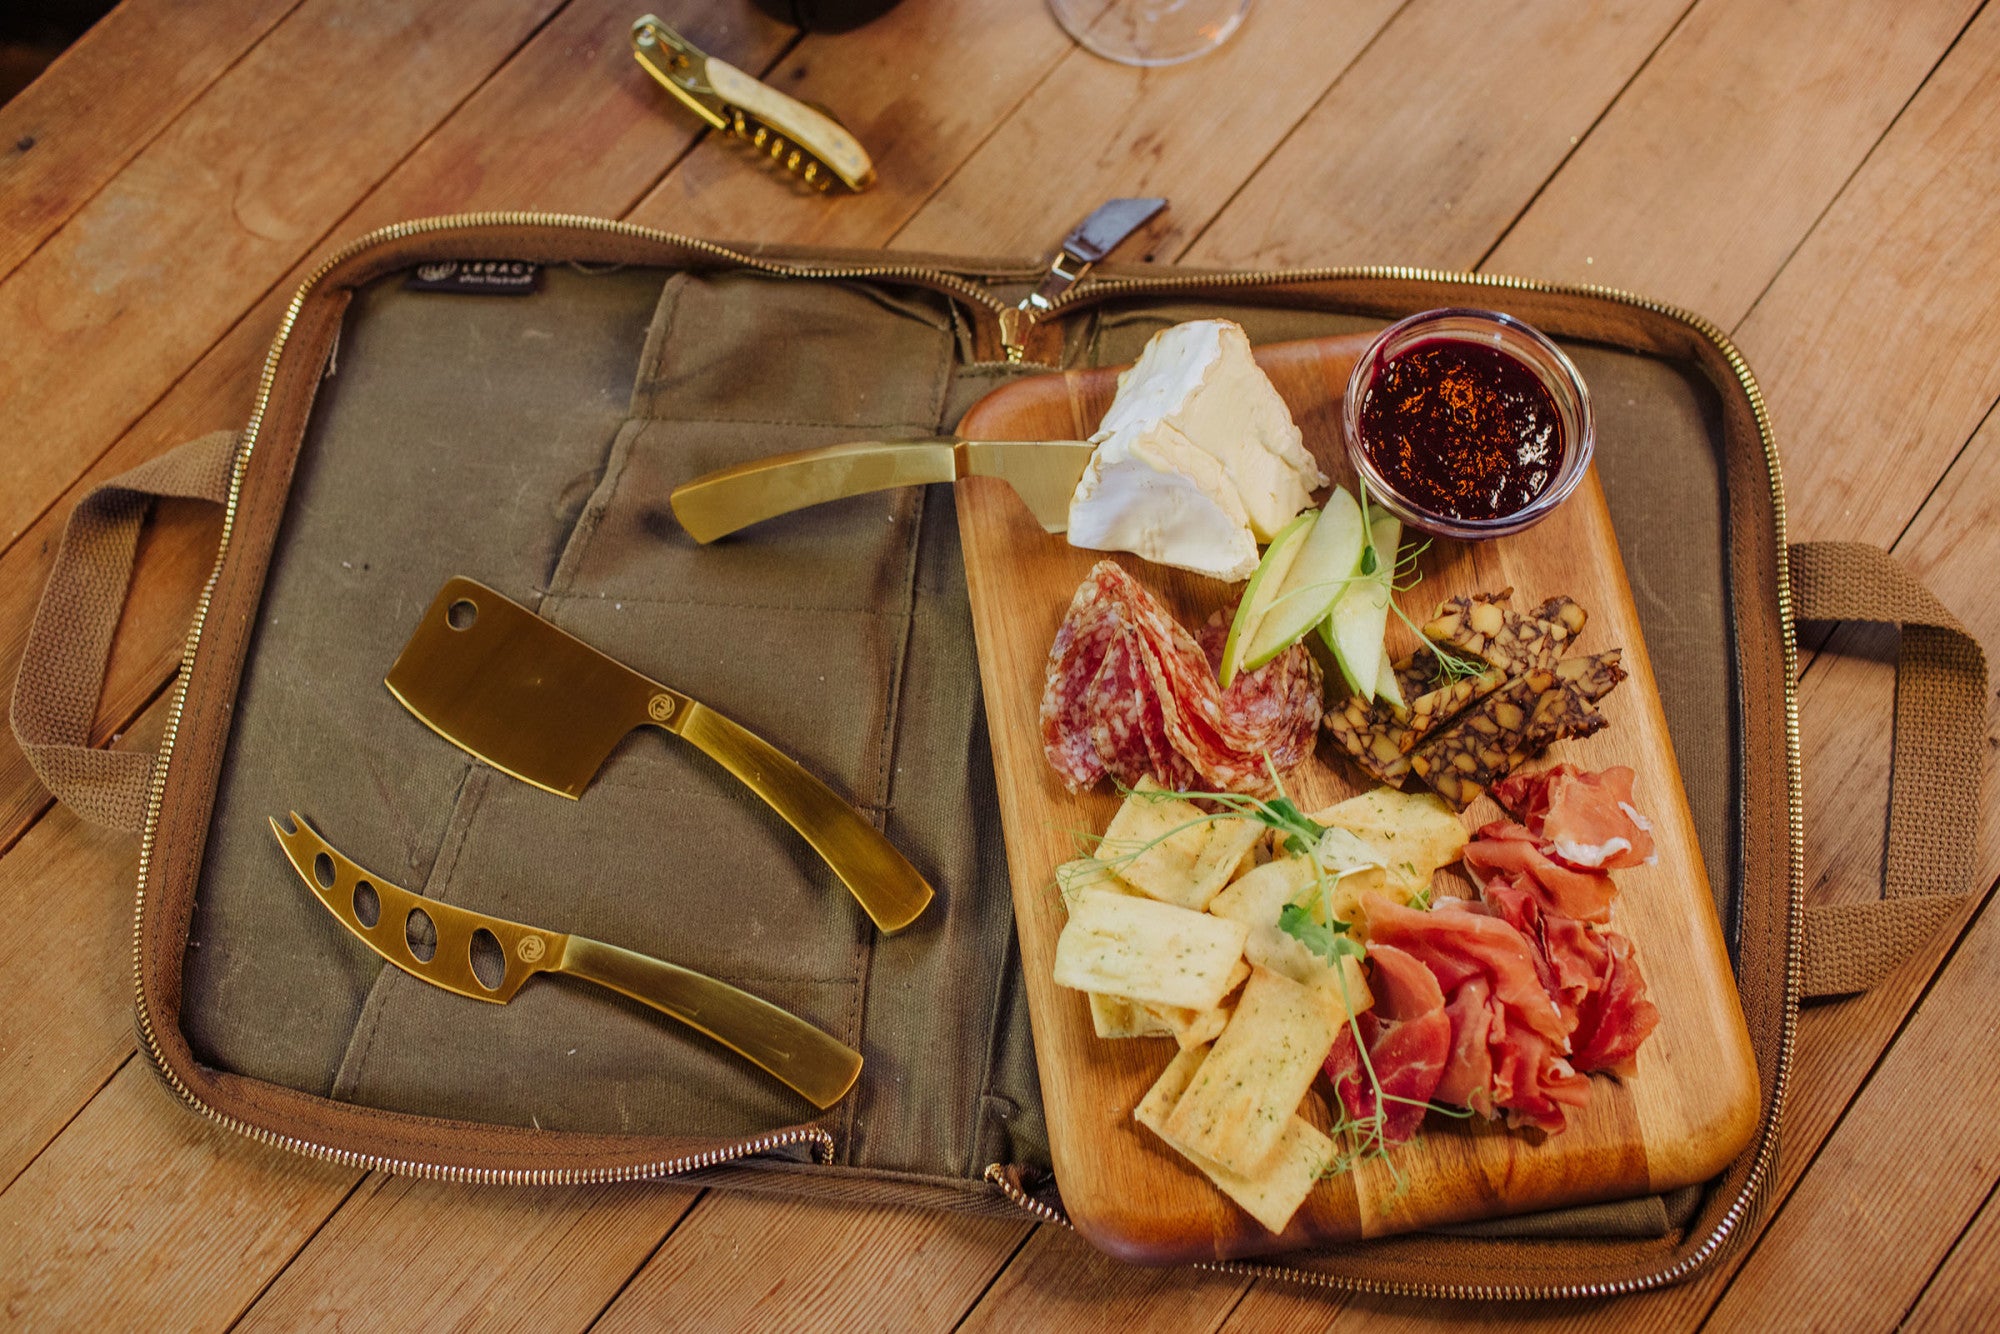 NEW travel cutting board & knife set cooler pocket charcuterie red